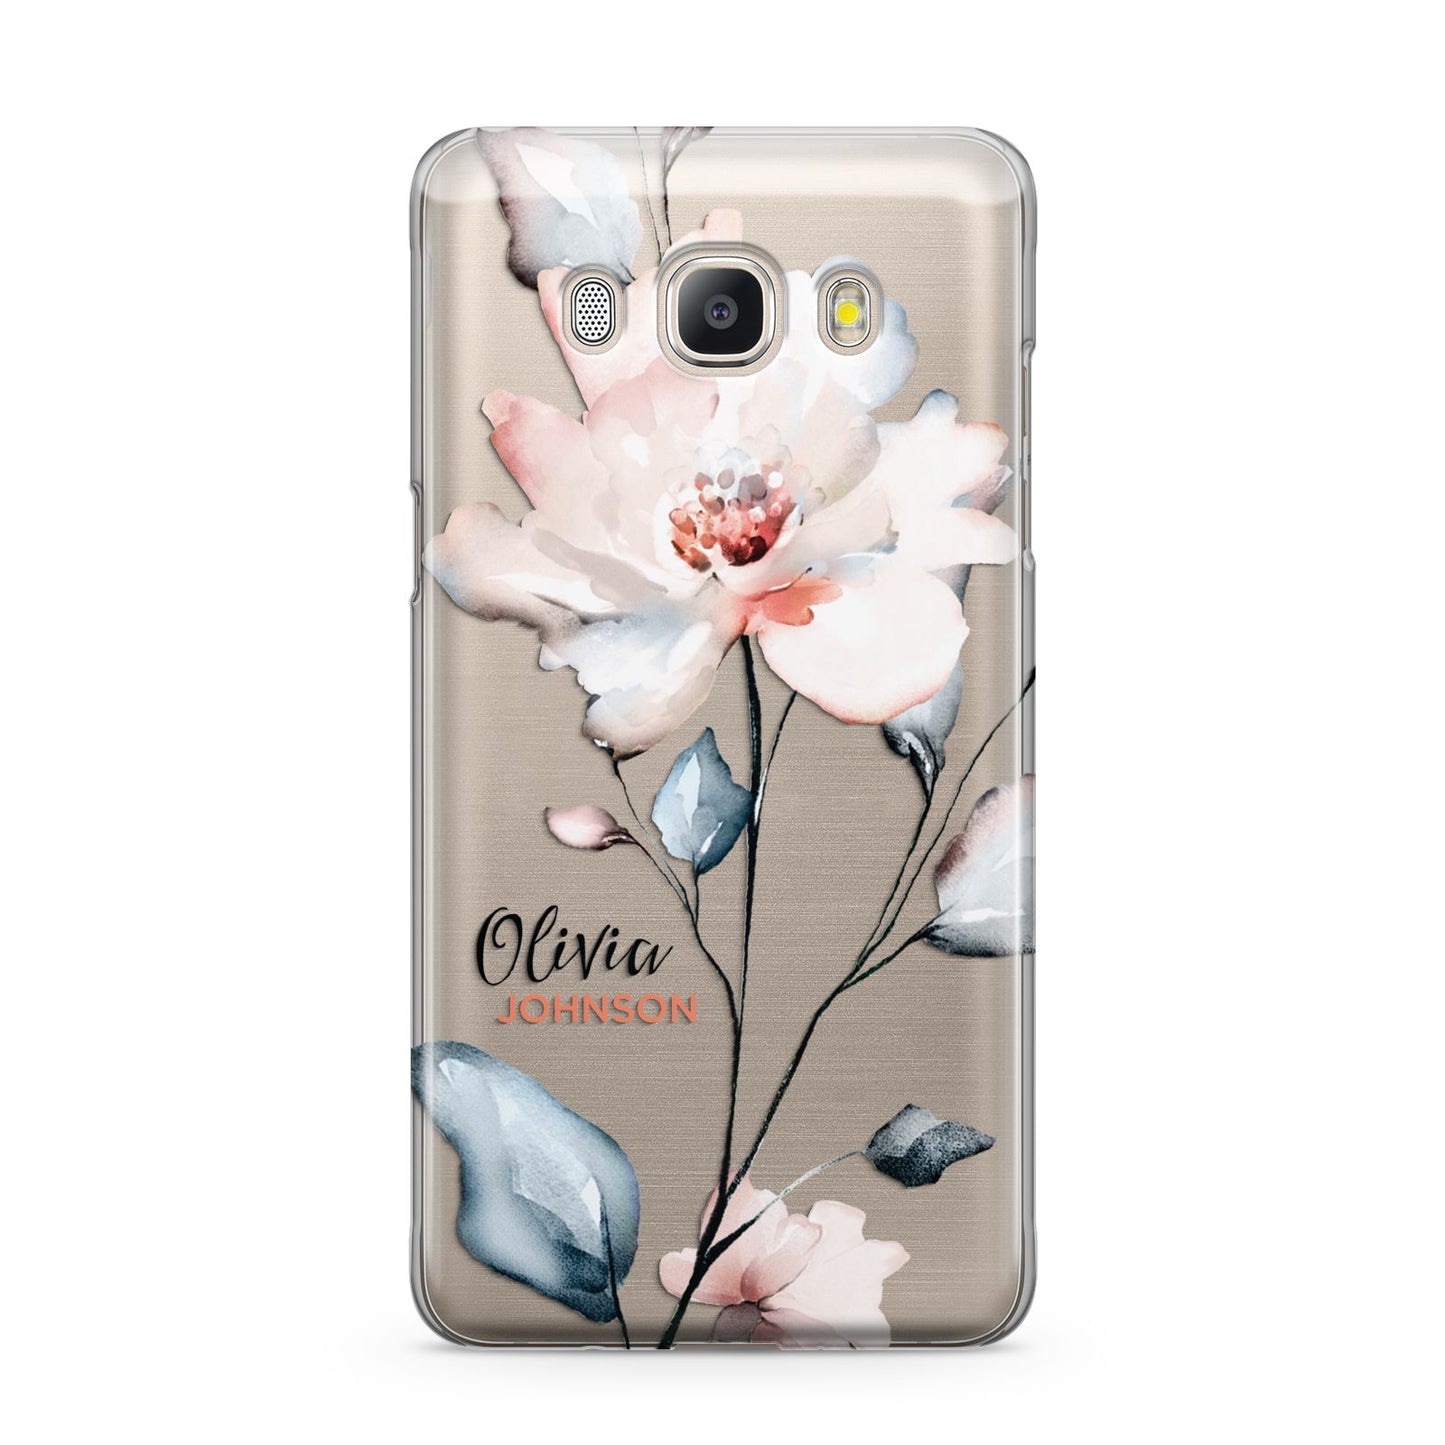 Personalised Name Watercolour Roses Samsung Galaxy J5 2016 Case